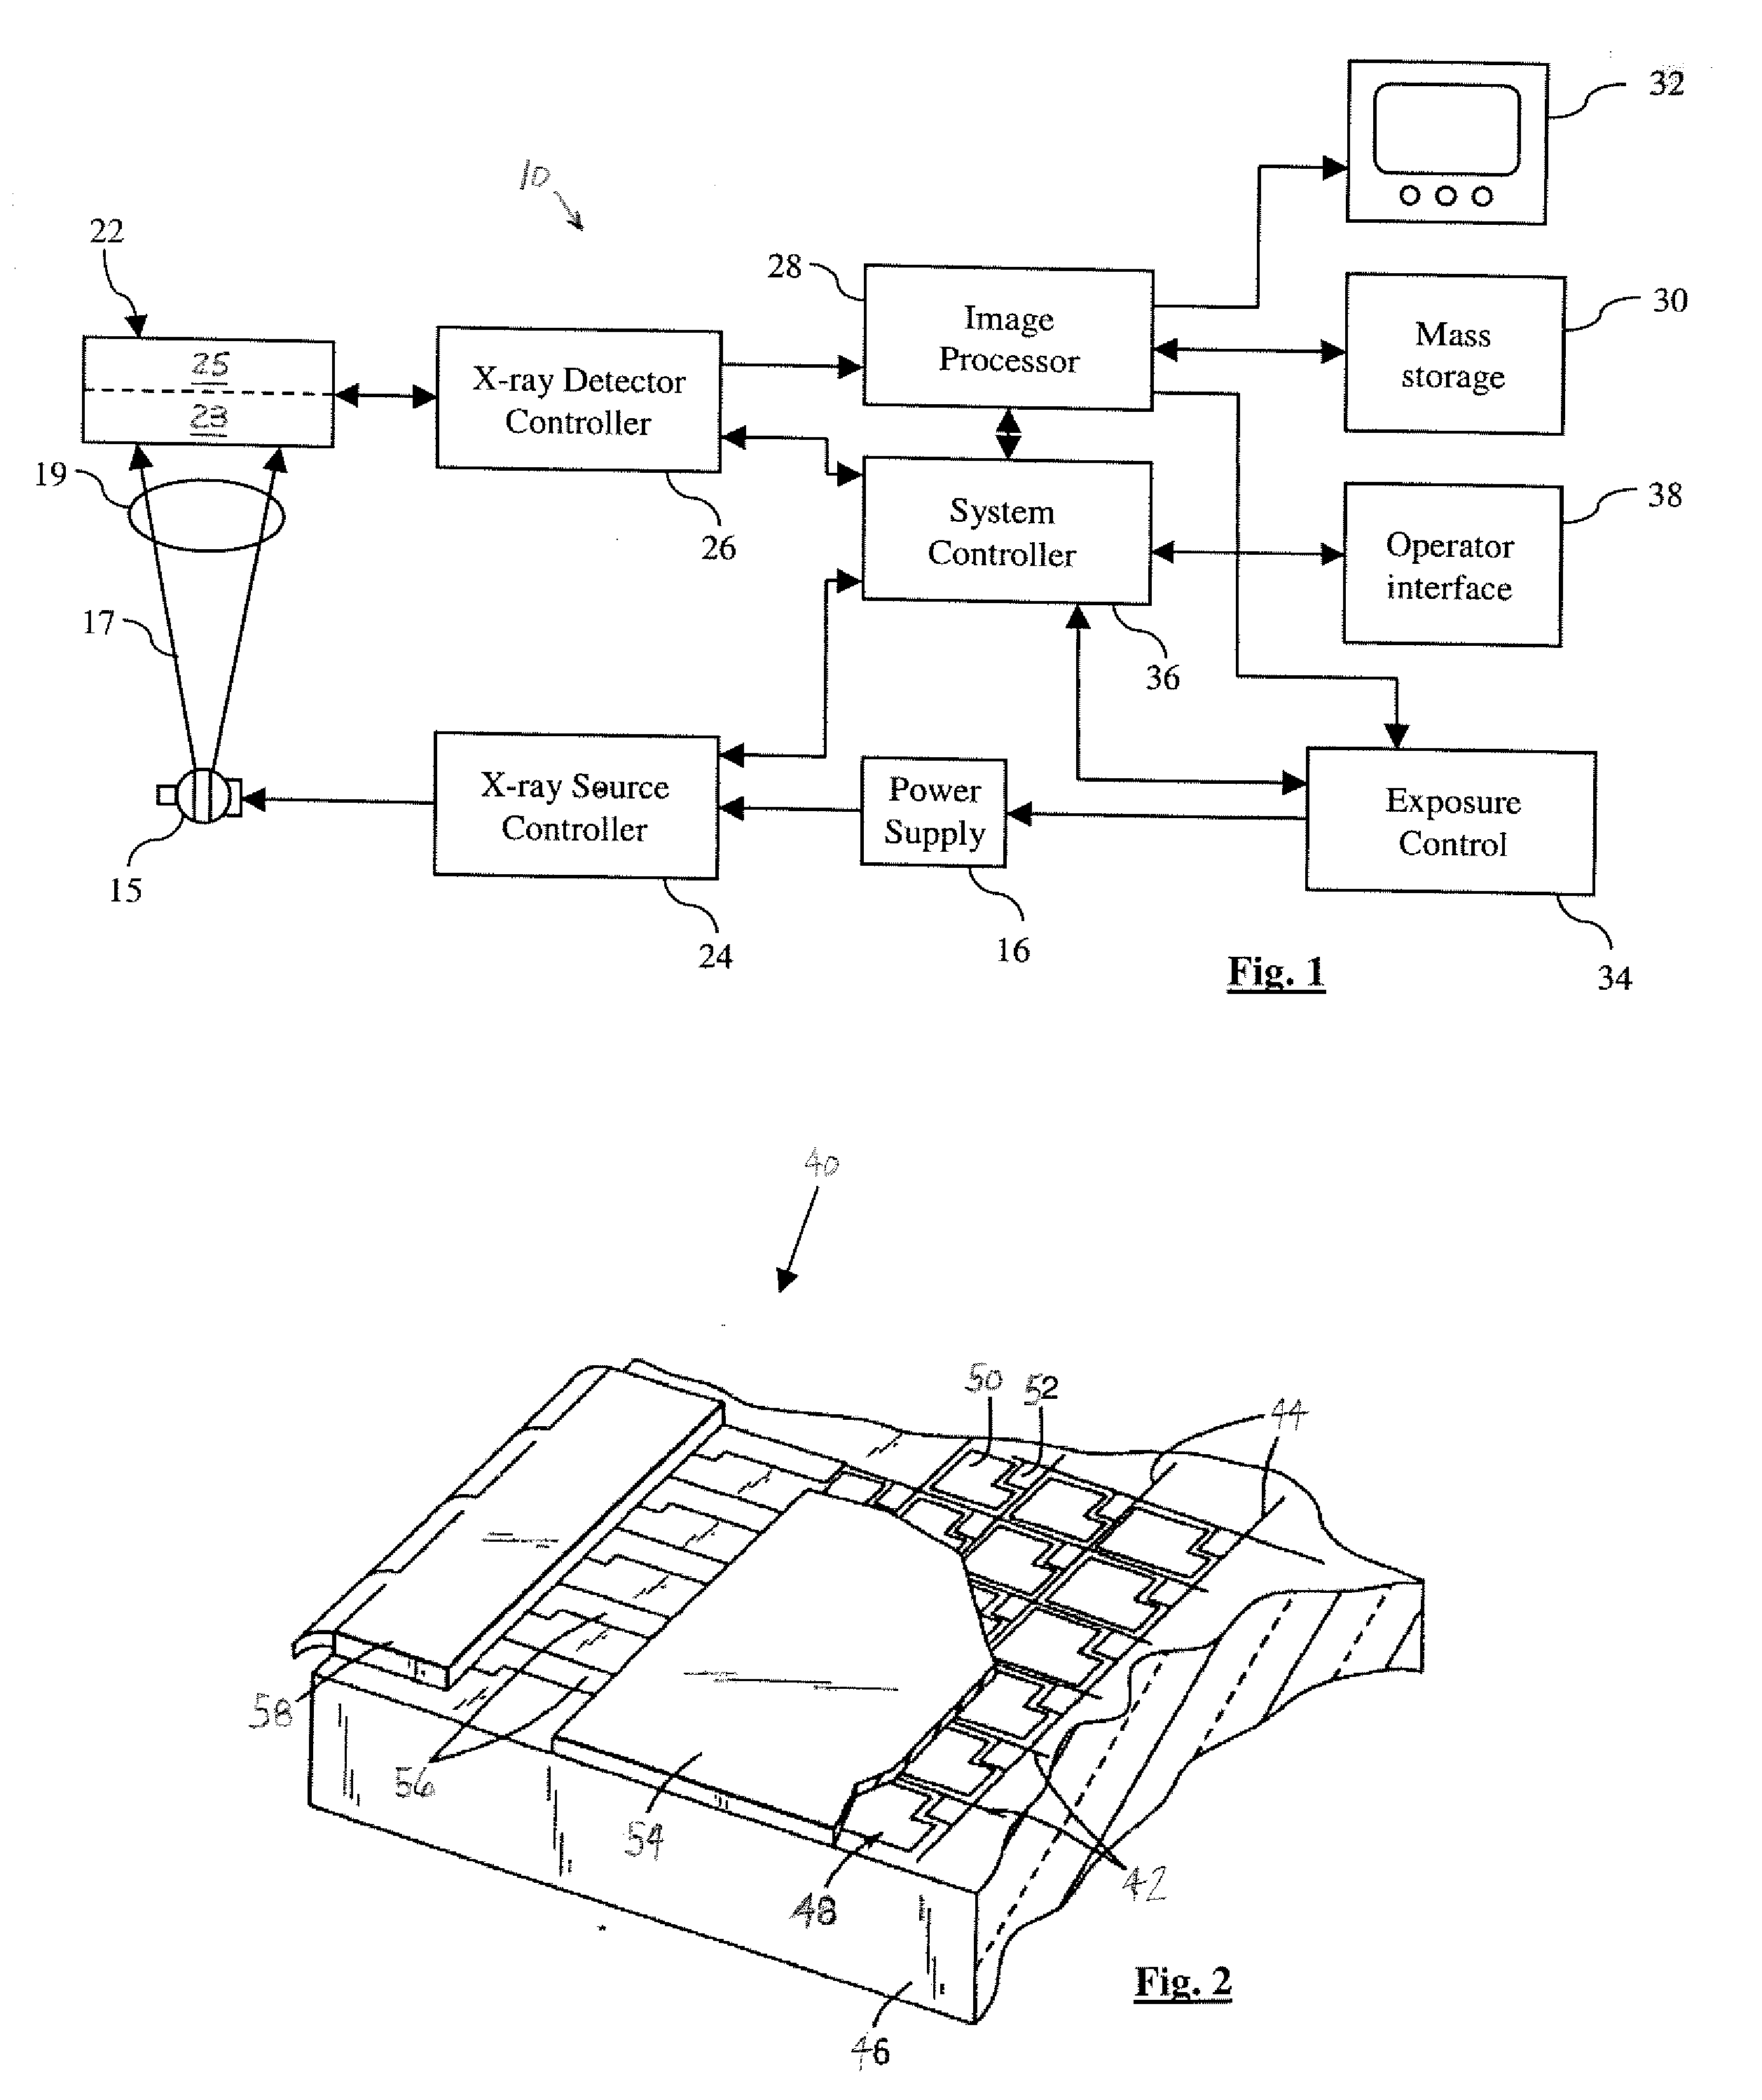 Count adaptive noise reduction method of x-ray images